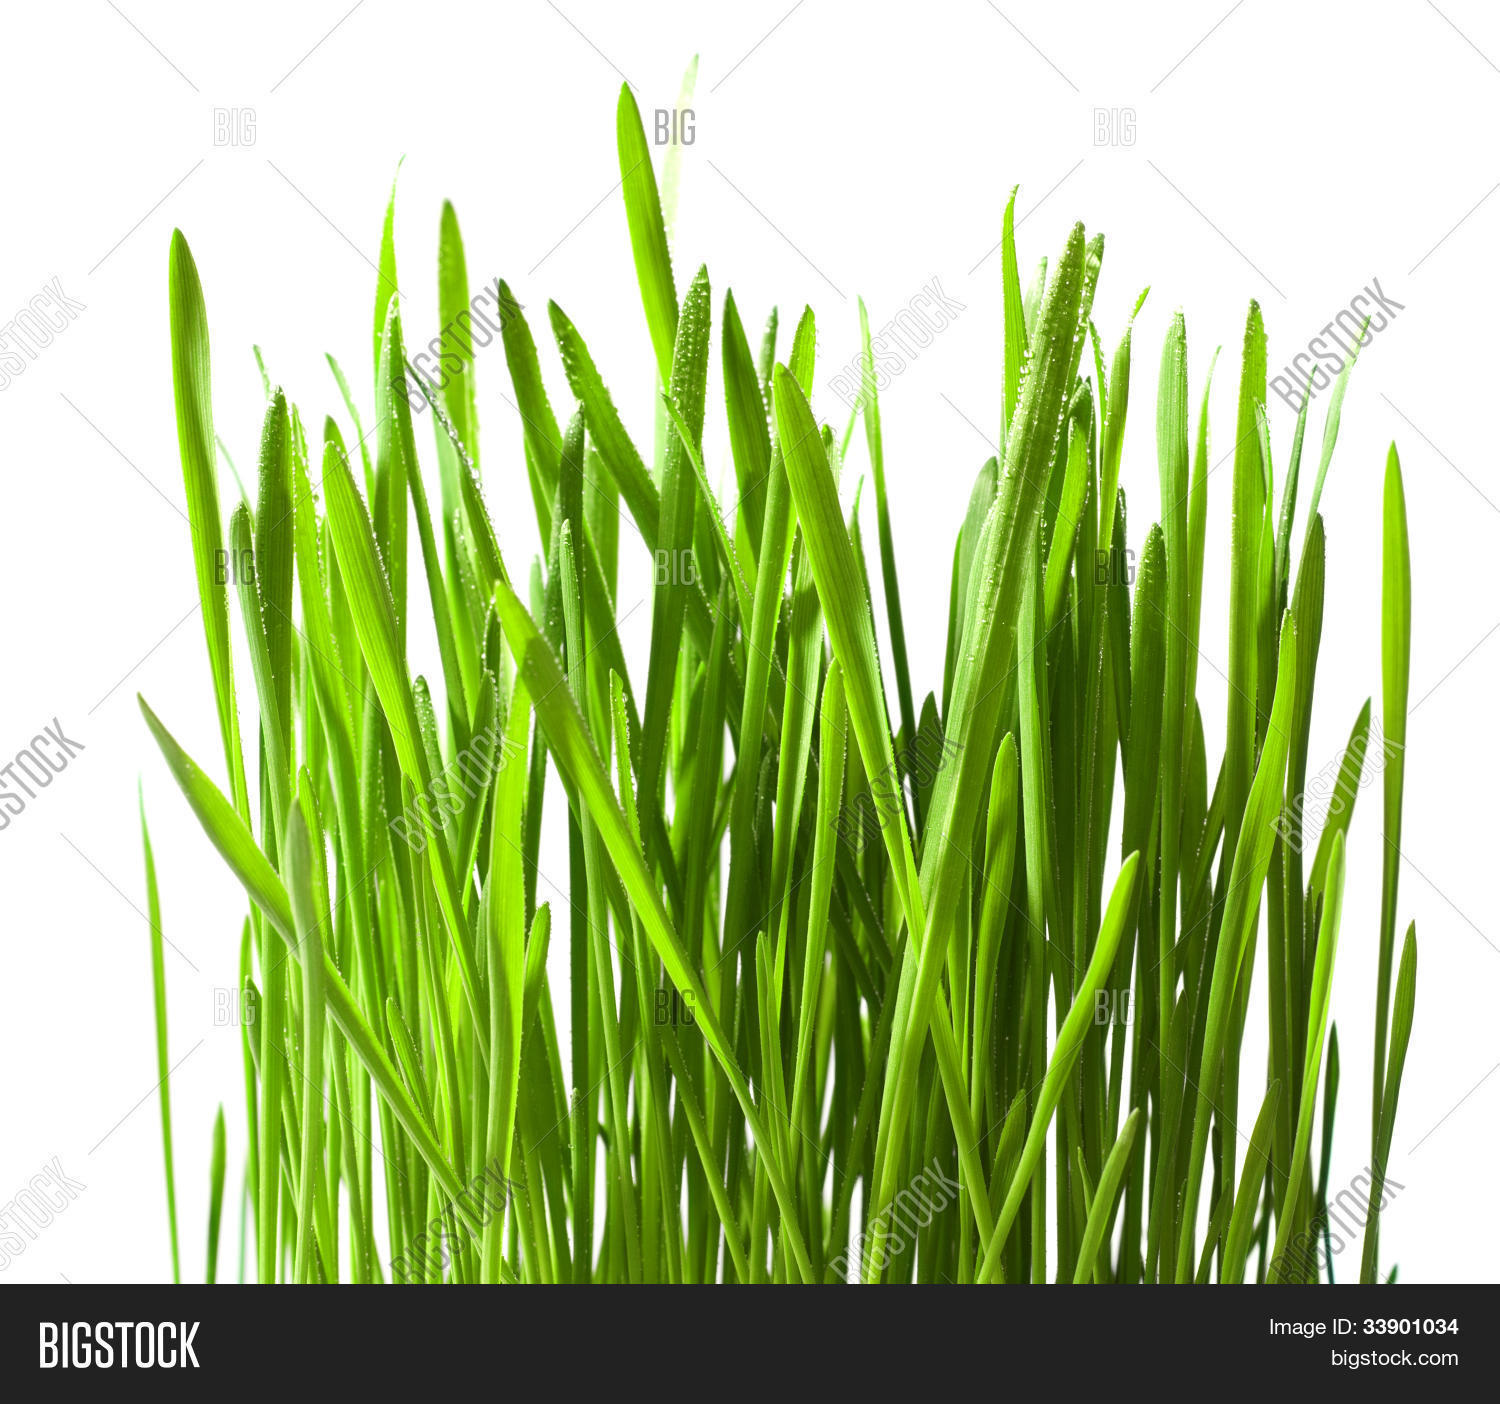 Isolated Green Grass Drops On White Image & Photo | Bigstock